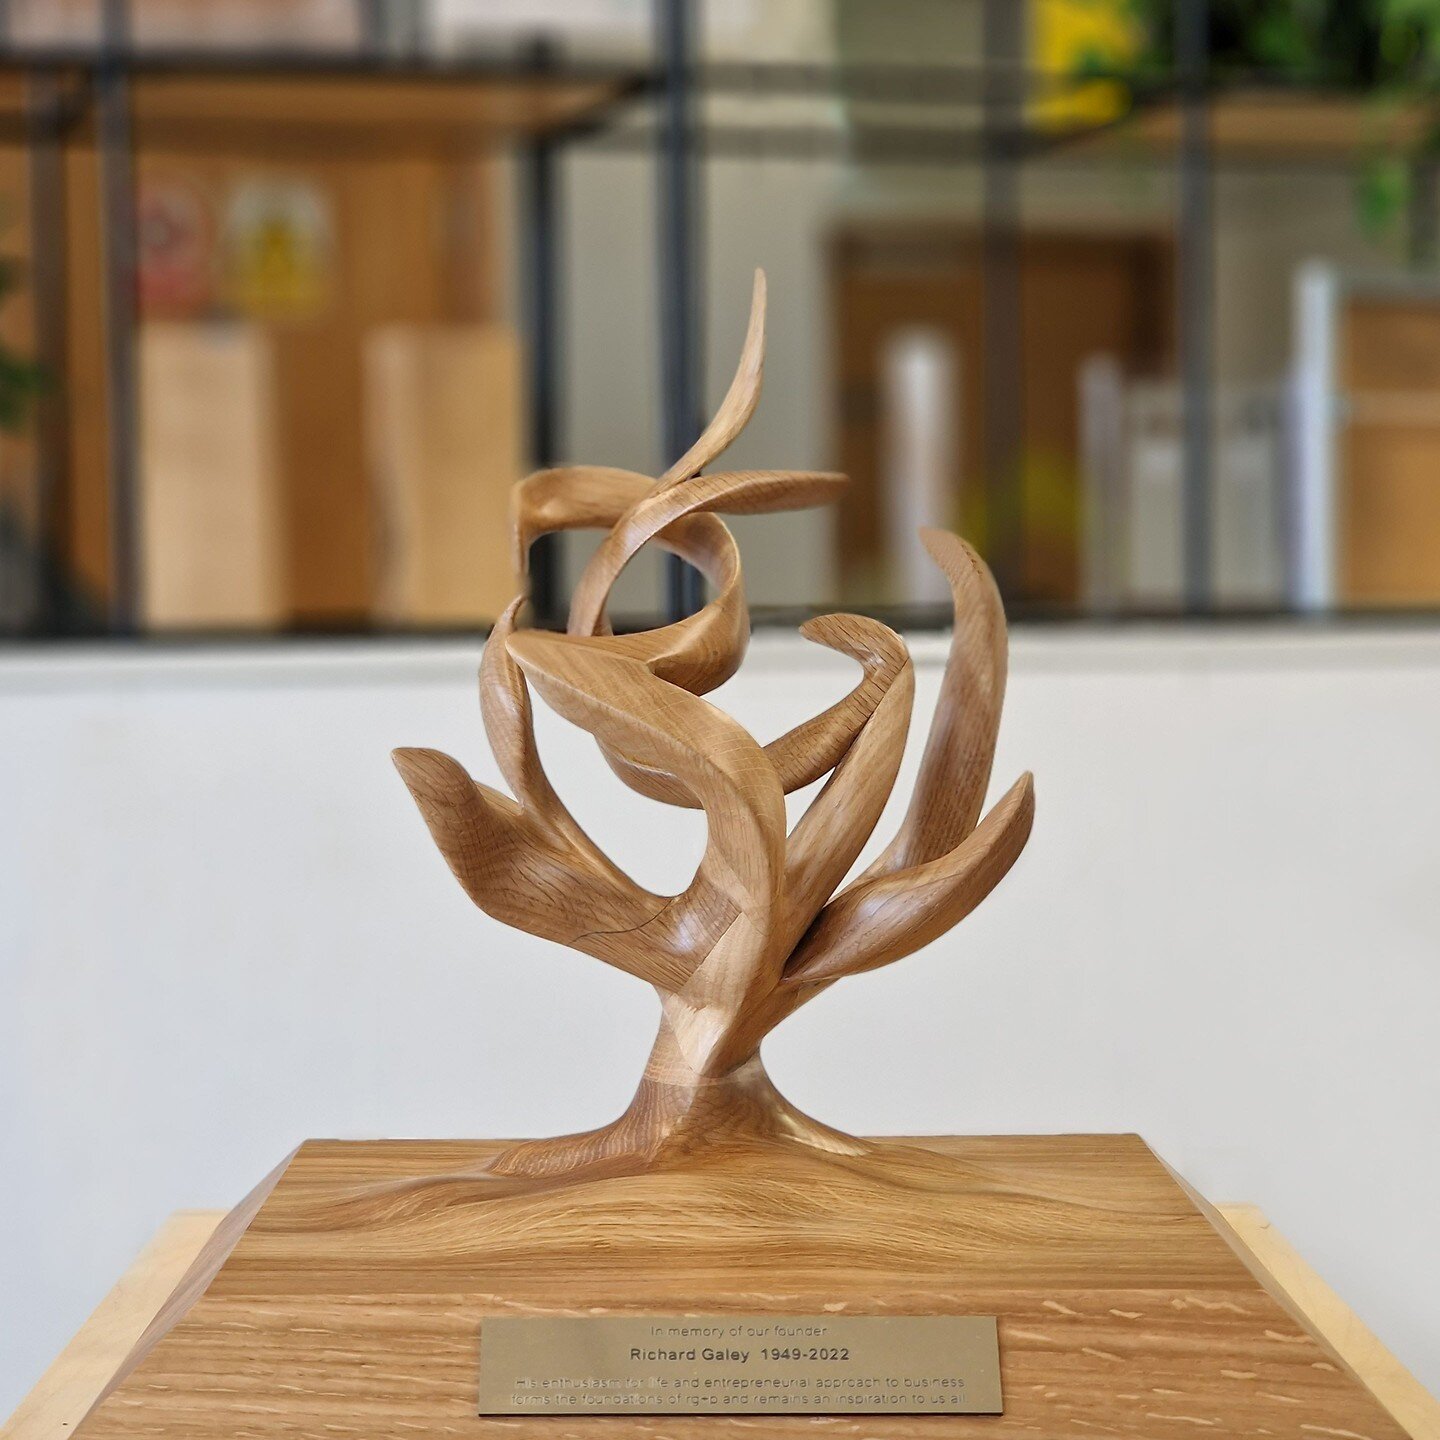 We have created a unique memorial sculpture to honour our founder, the late Richard Galey who passed away in March 2022.

Incorporating Richard&rsquo;s initials in a single 3D form, the sculpture is made of oak and was designed following a company-wi